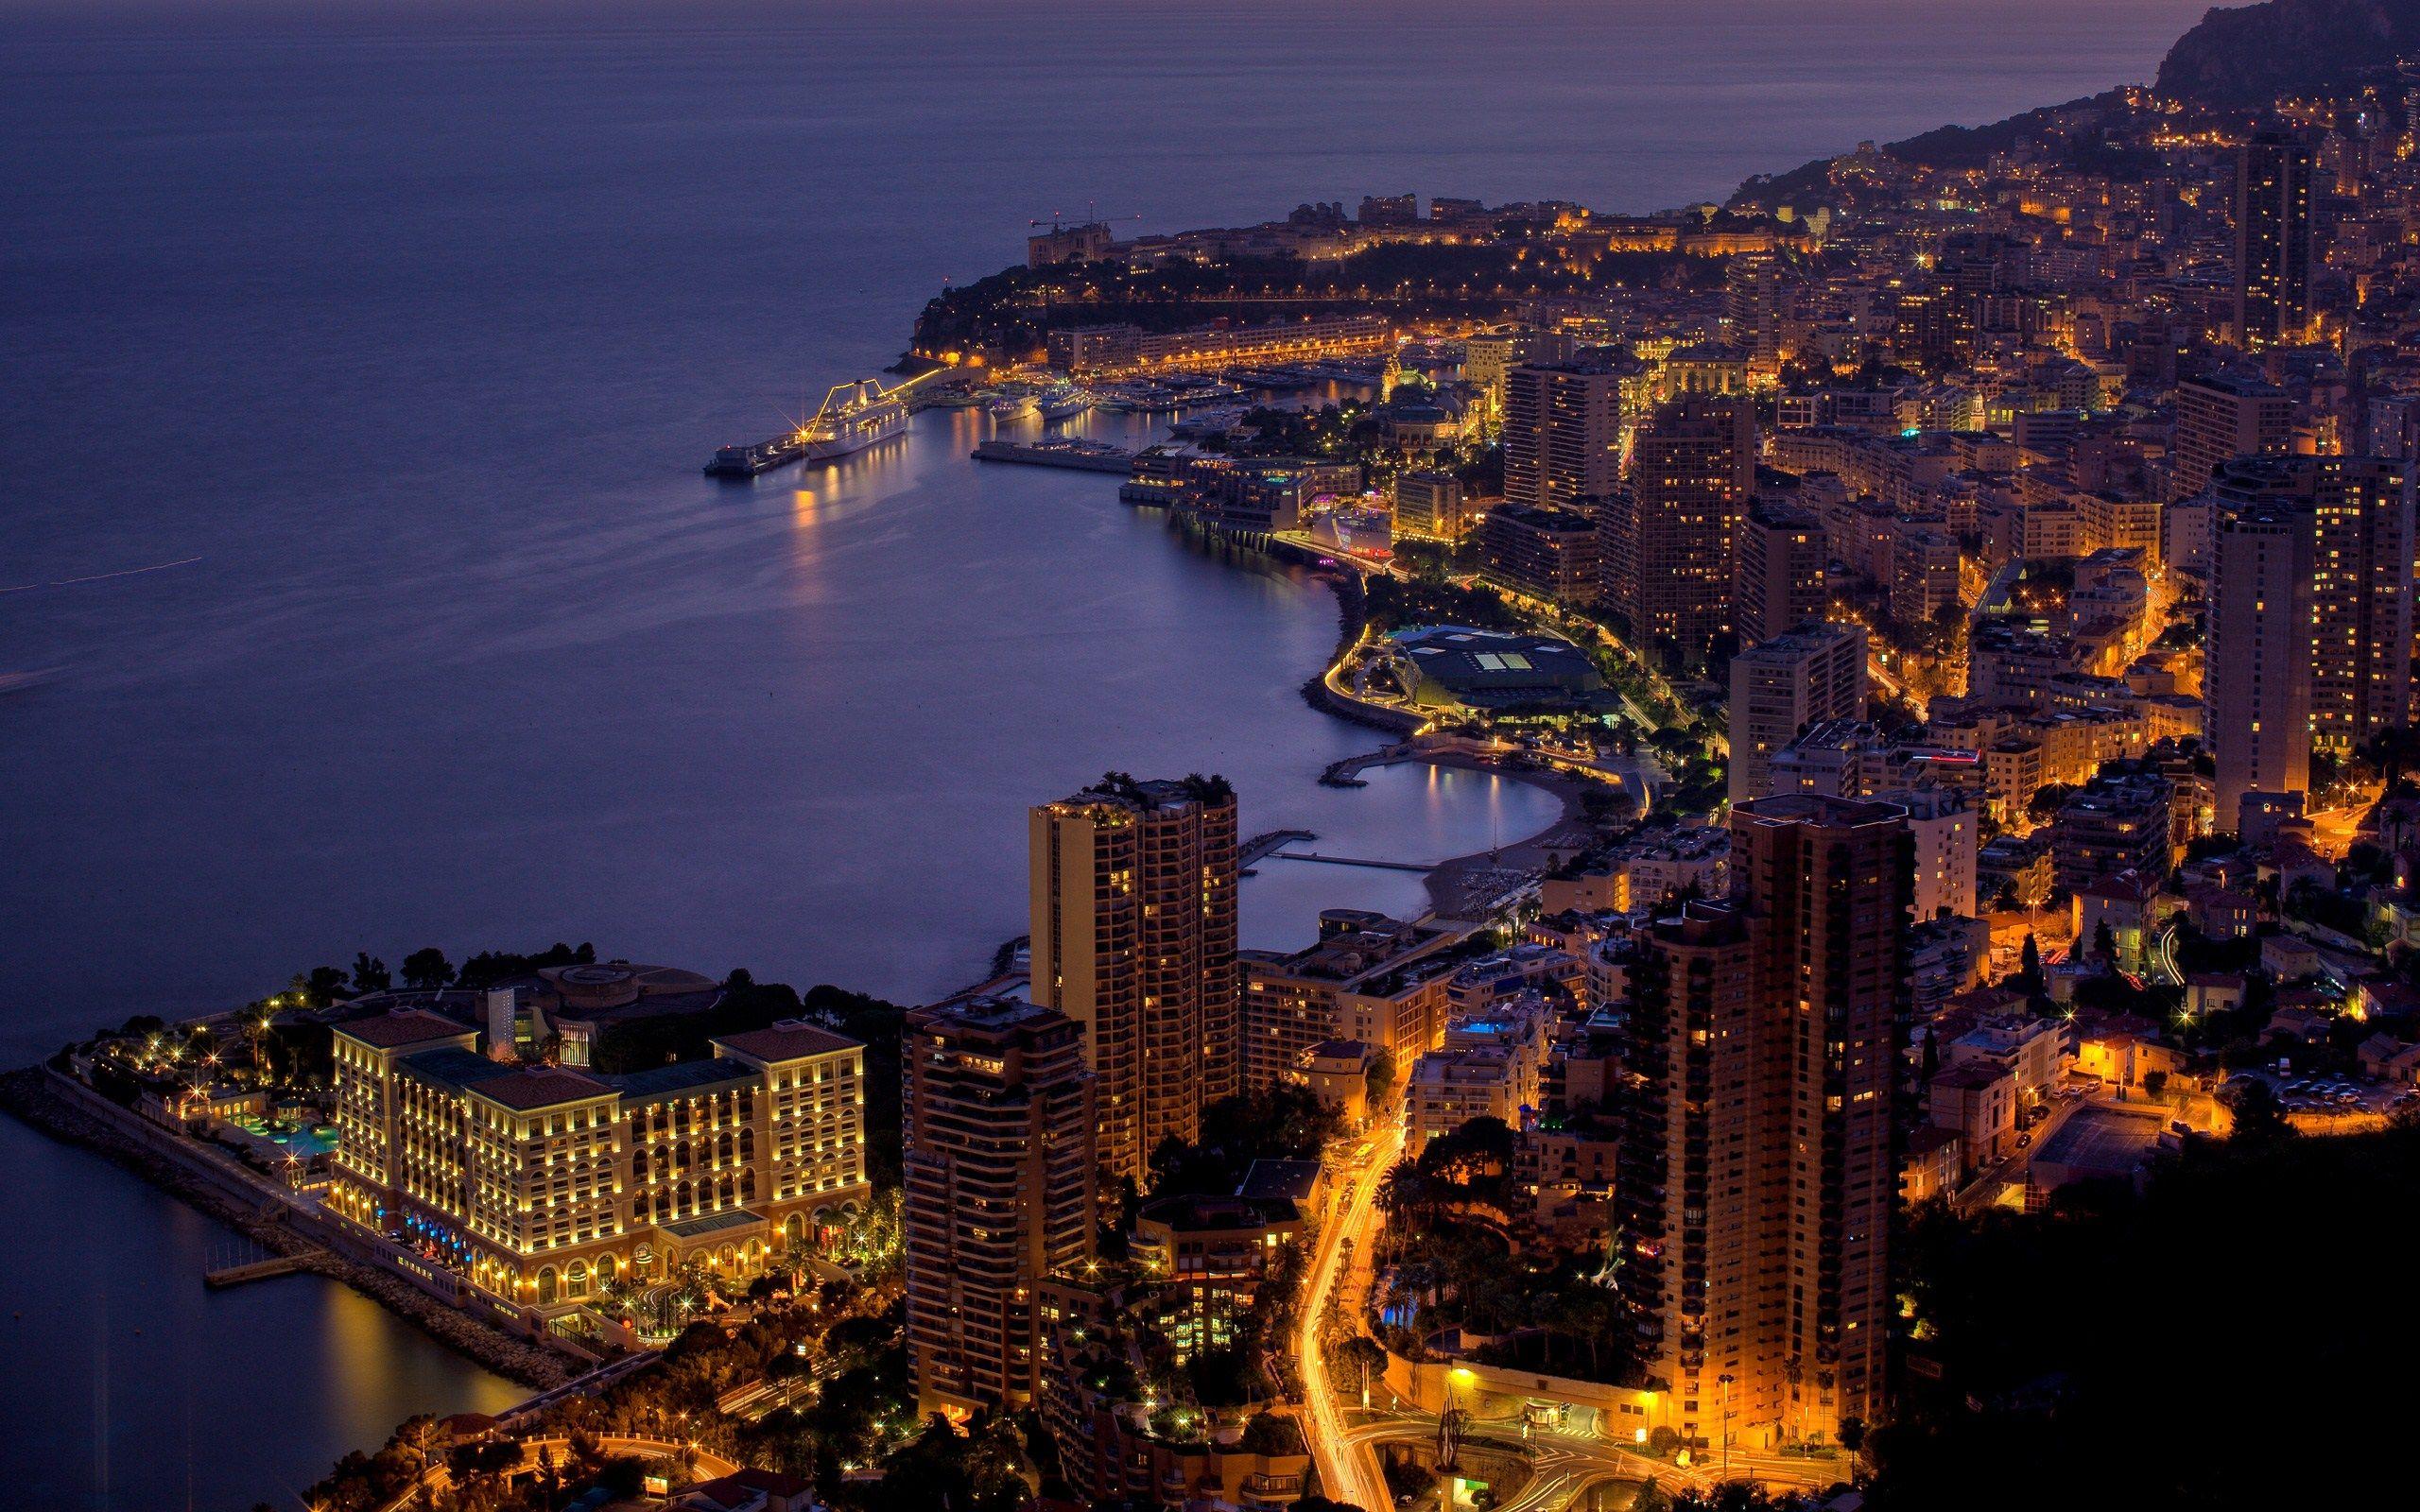 Man Made Monaco Landscape. Monaco, The great outdoors, Places to see